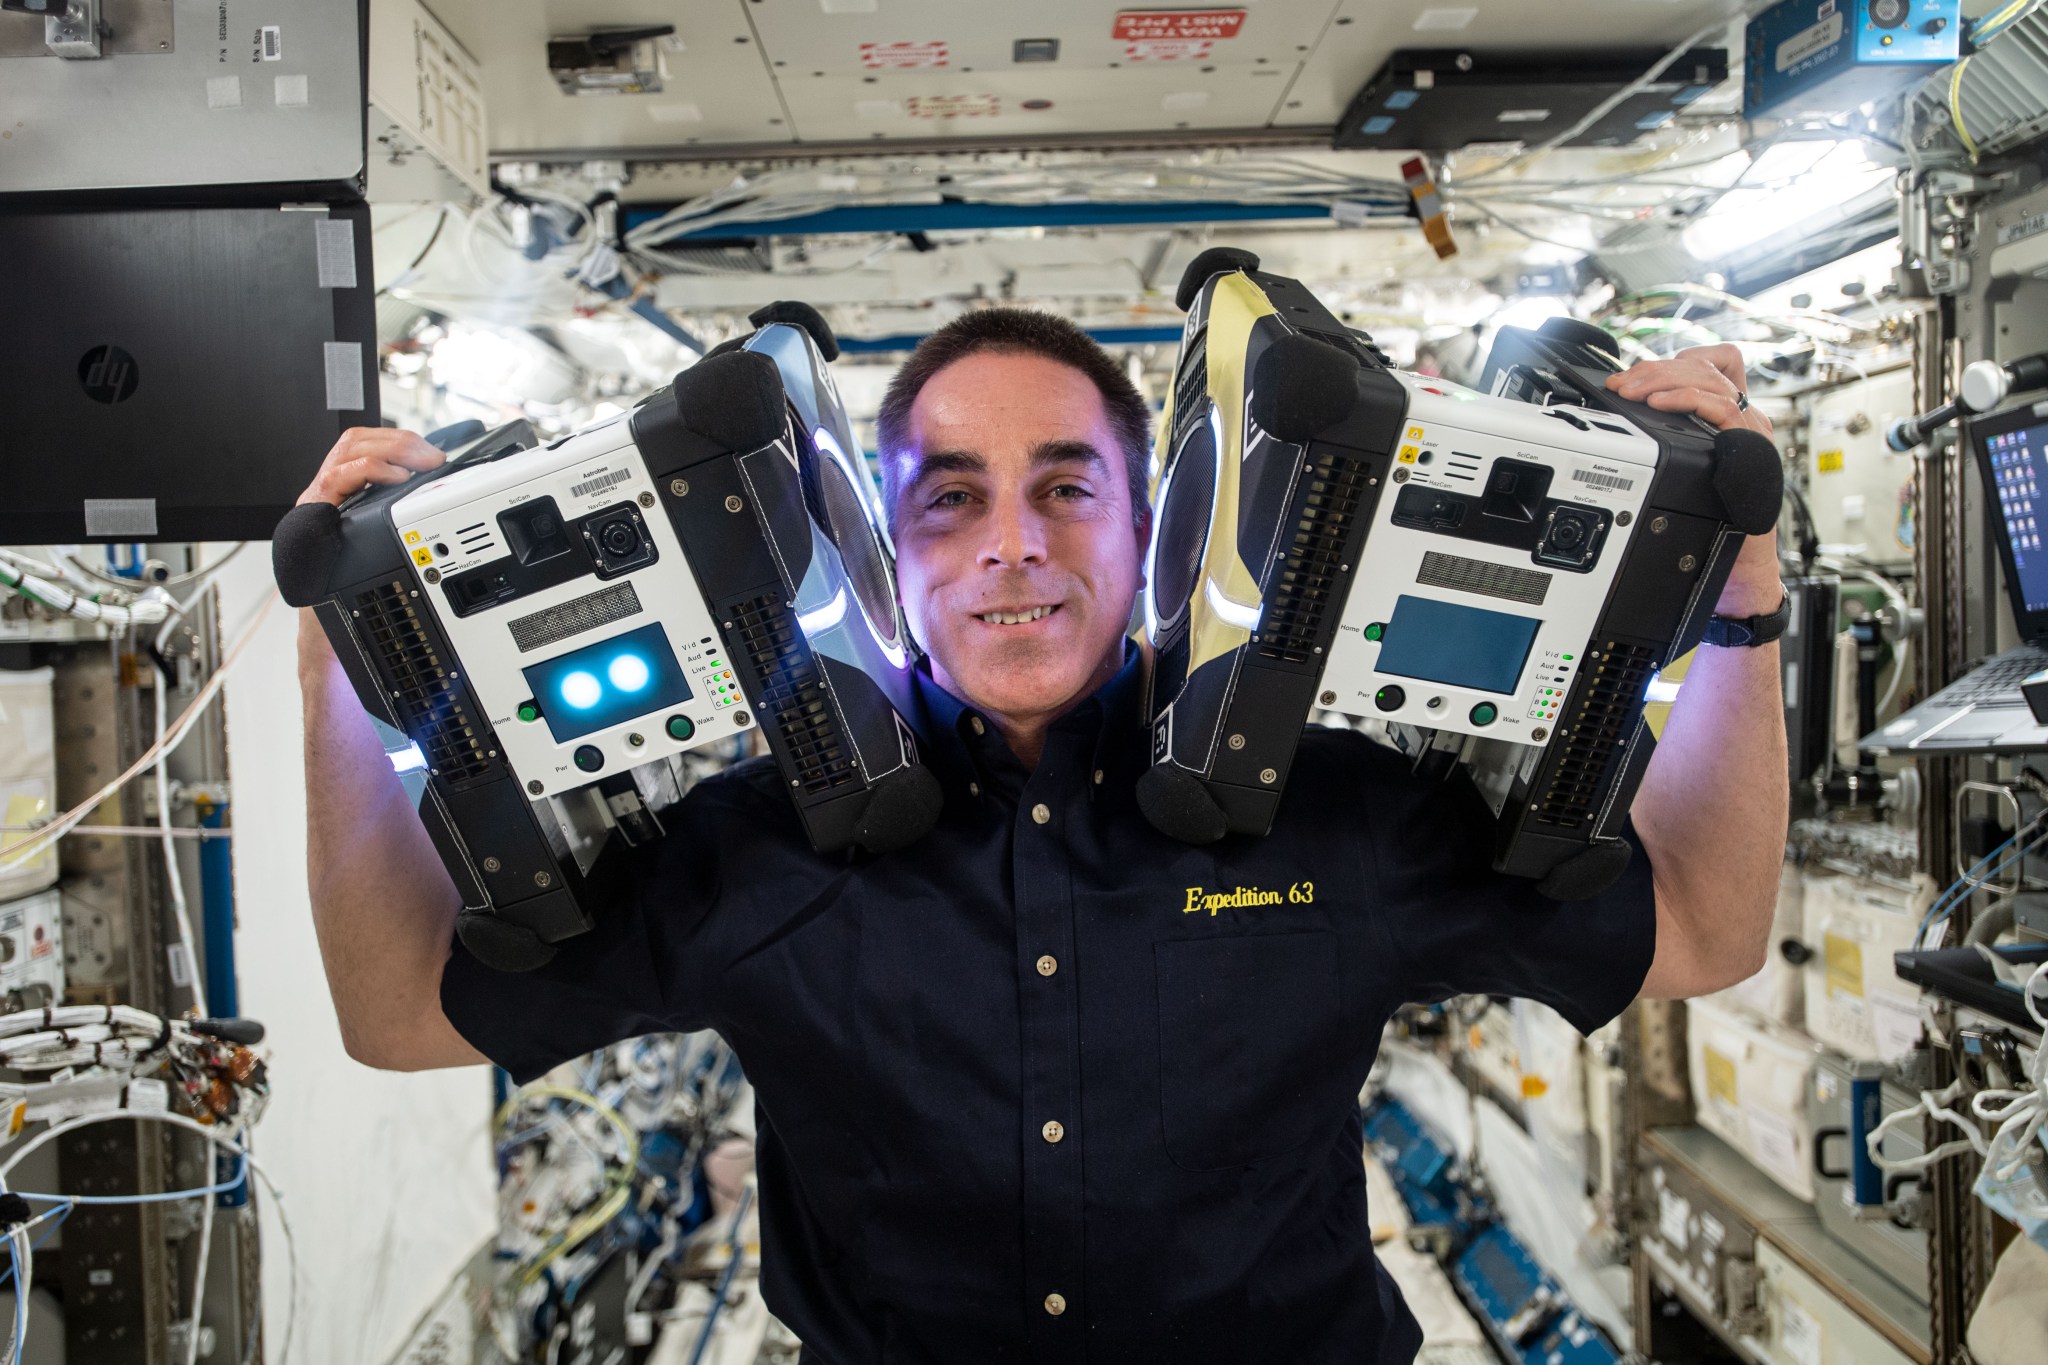 NASA astronaut and Expedition 63 Commander Chris Cassidy poses